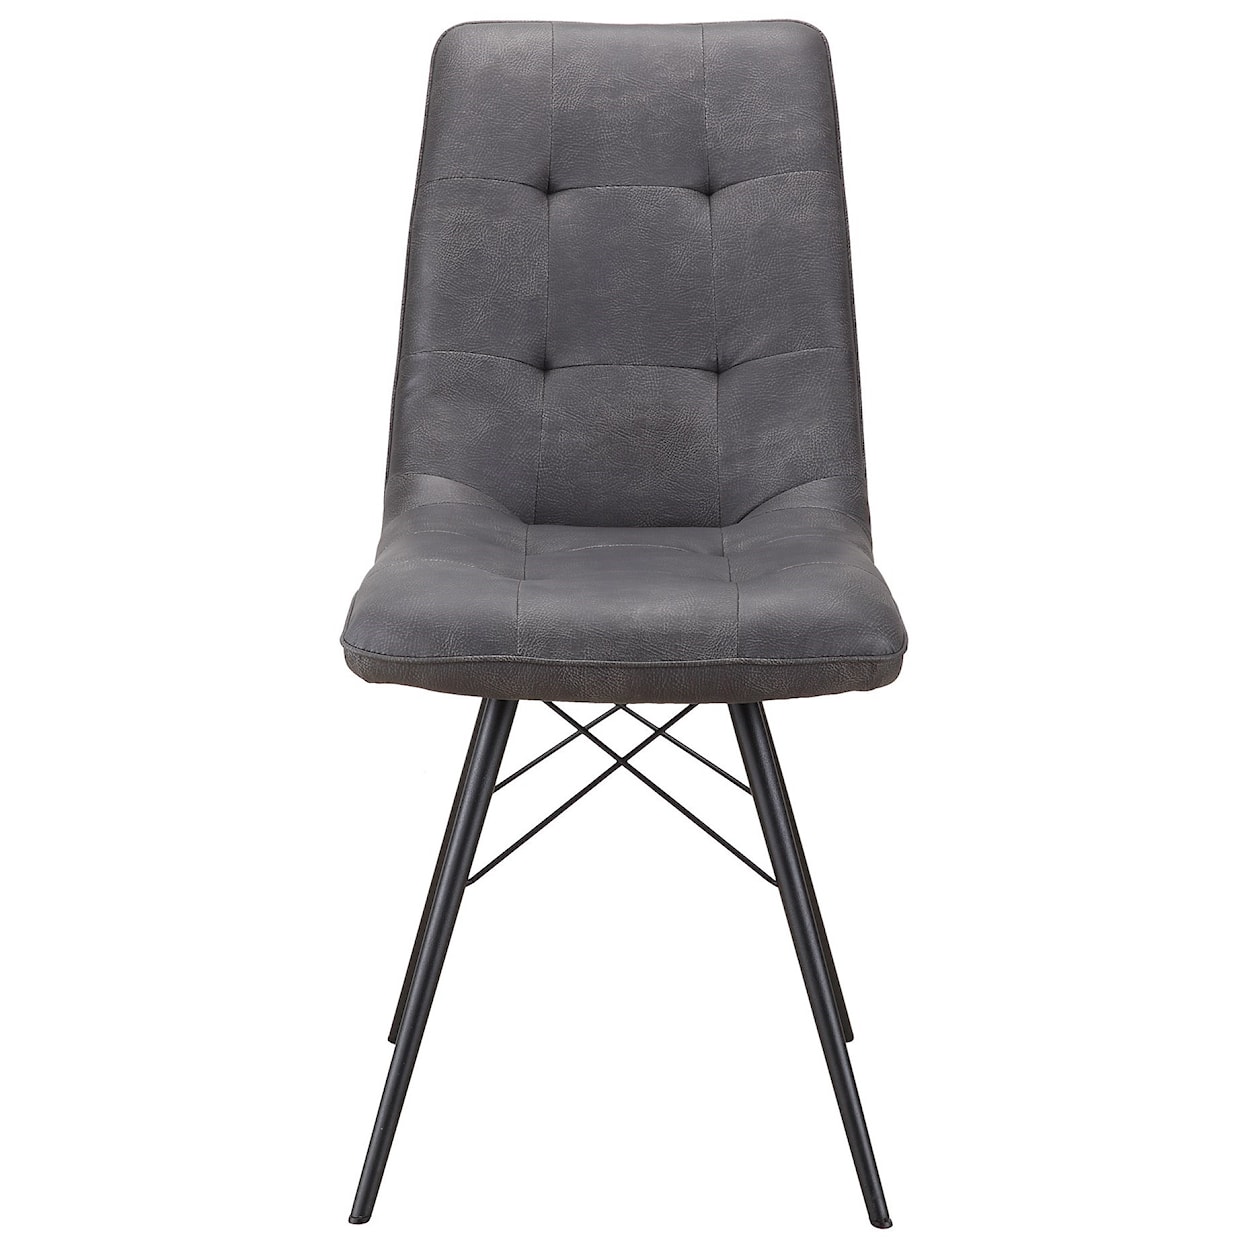 Moe's Home Collection Morrison Side Chair